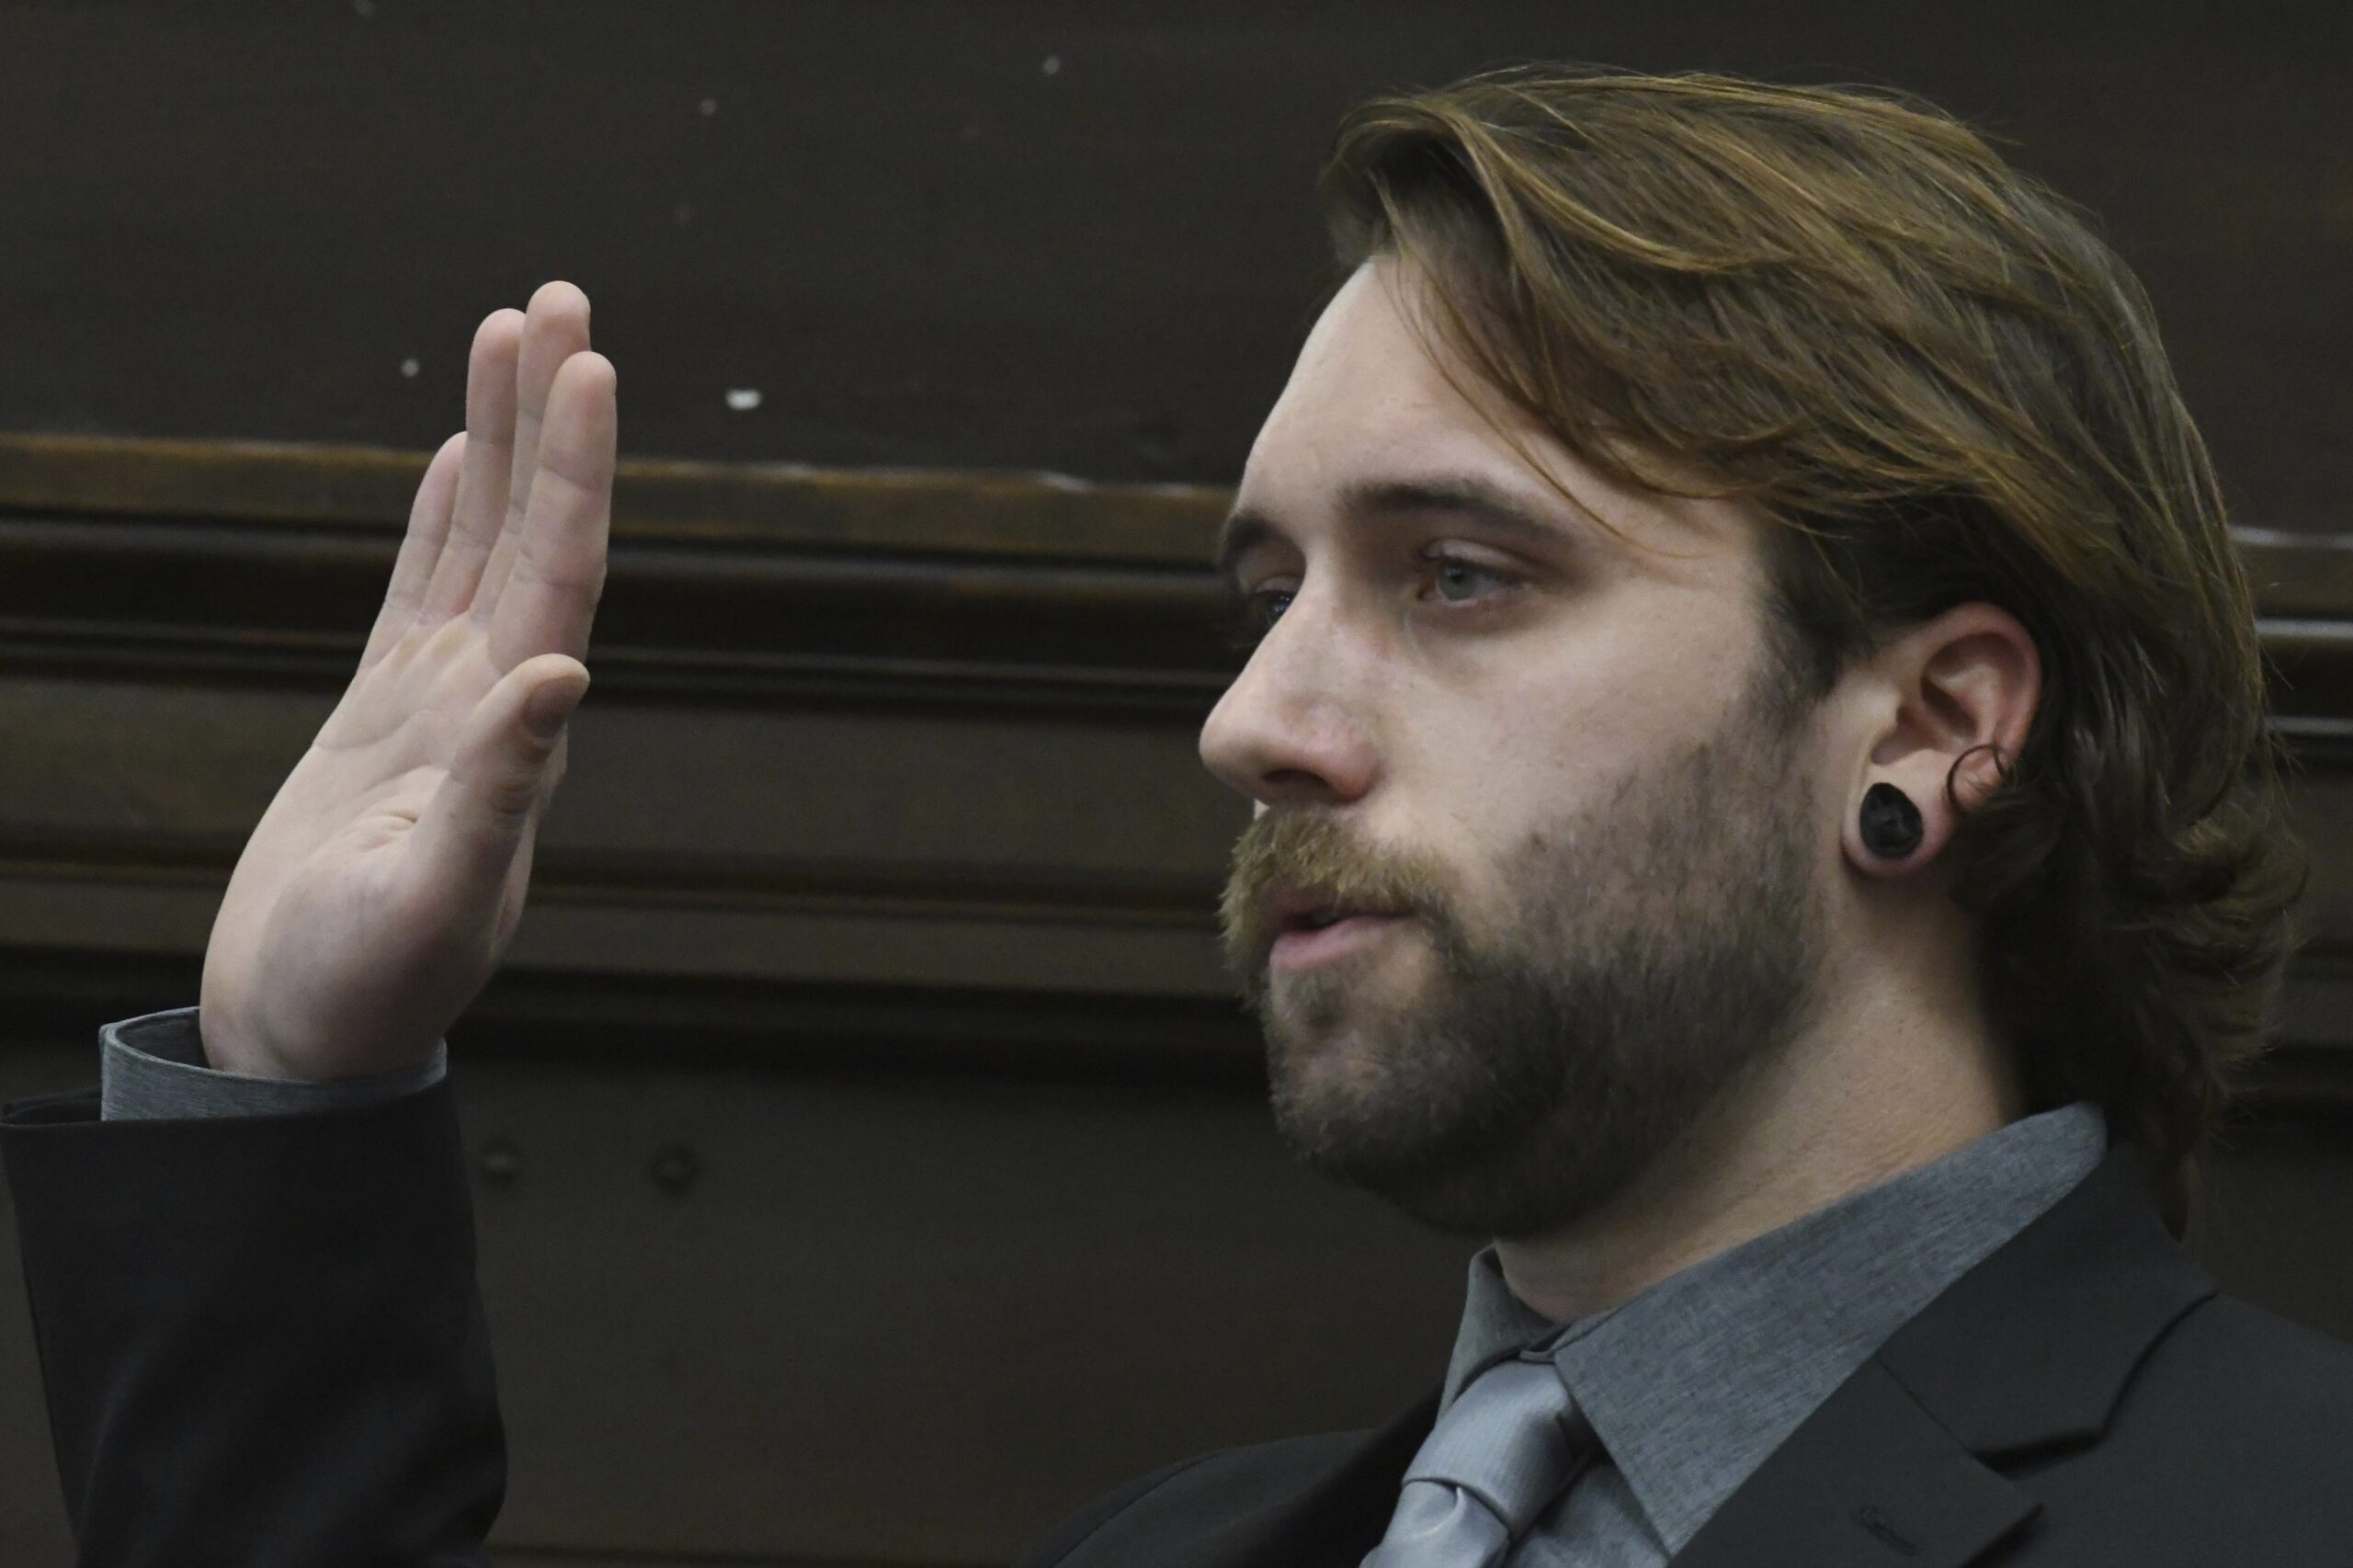 Gaige Grosskreutz is sworn in before he testifies about being shot in the right bicep during the Kyle Rittenhouse trial